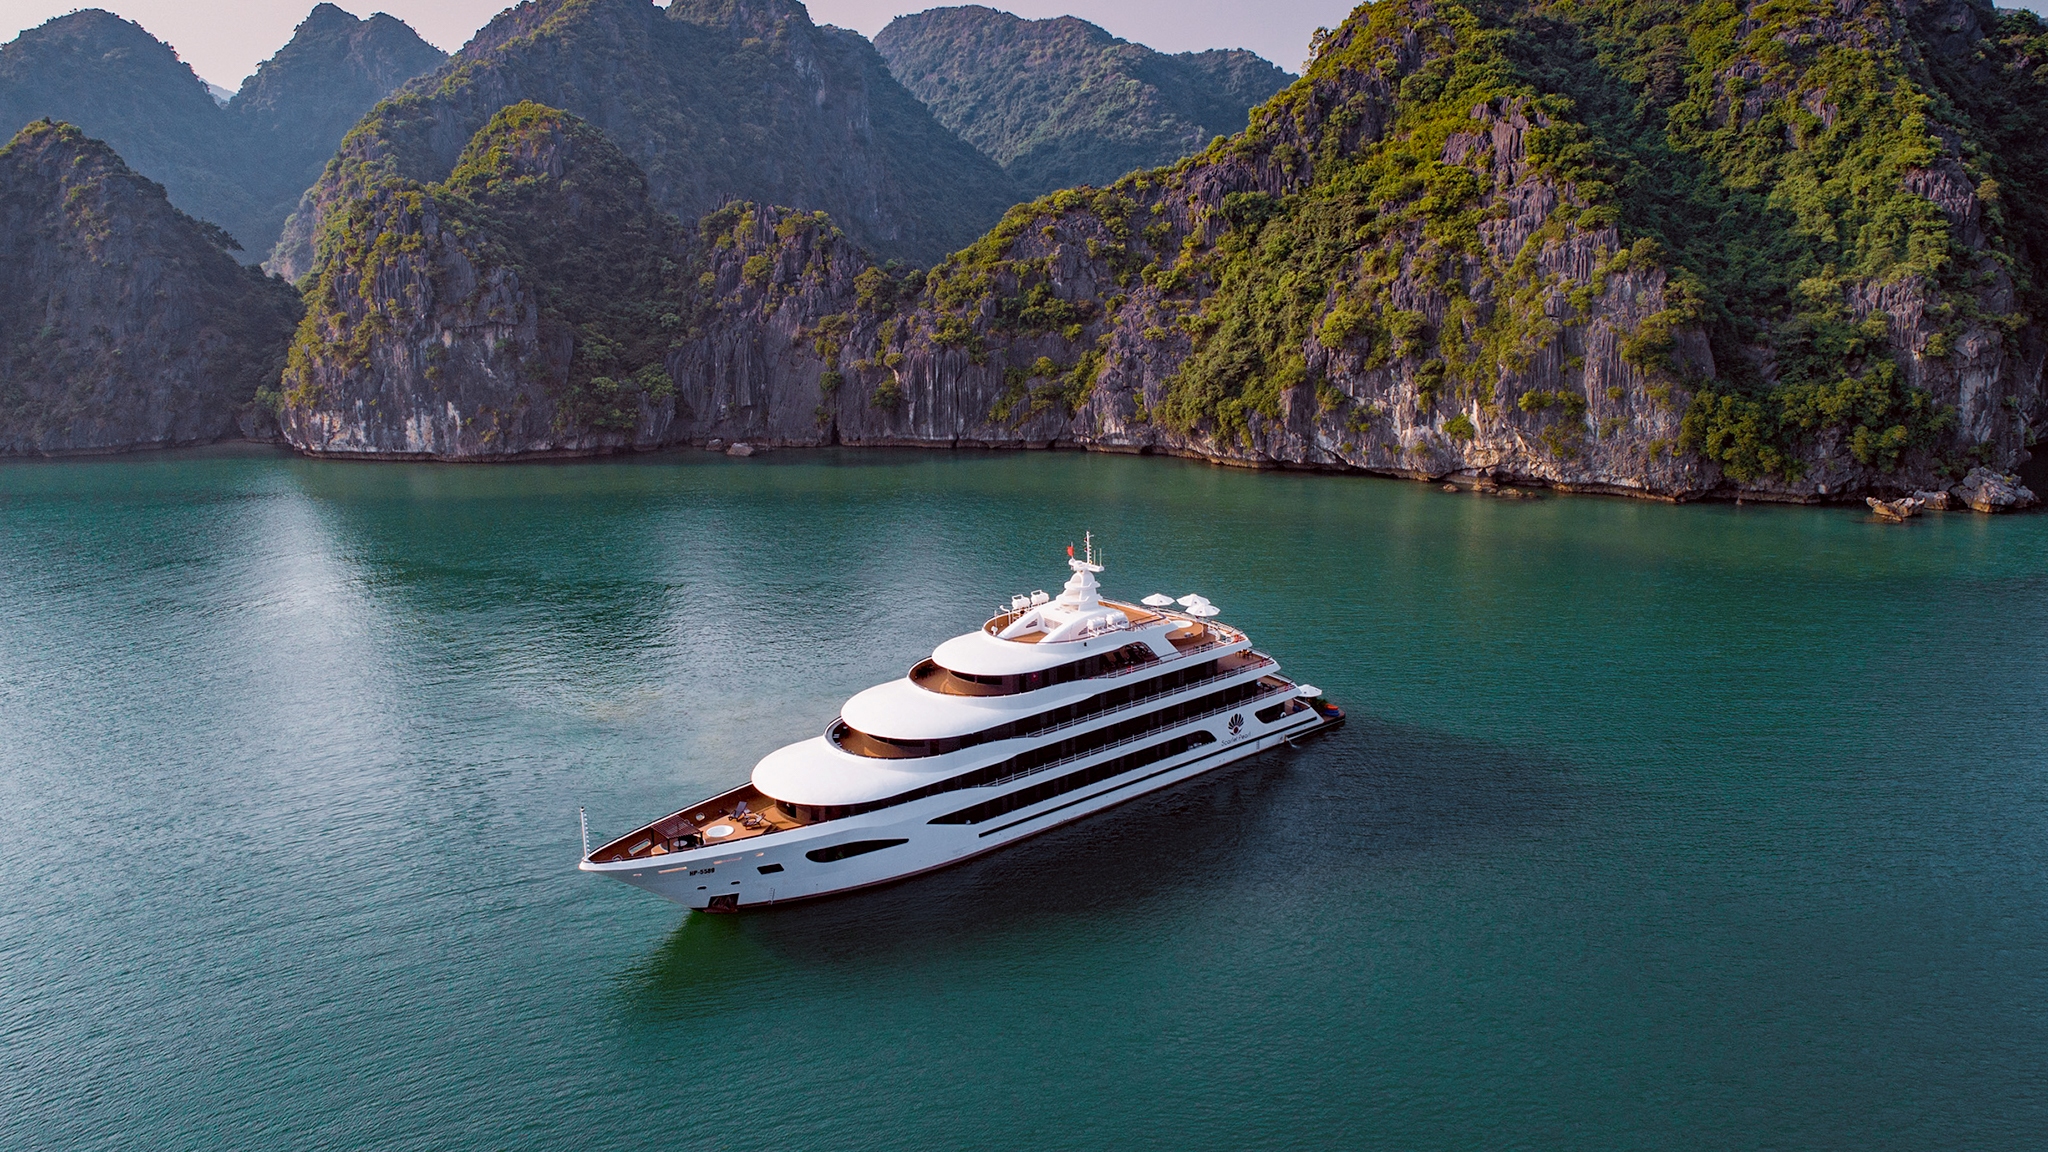 halong bay cruise price in inr